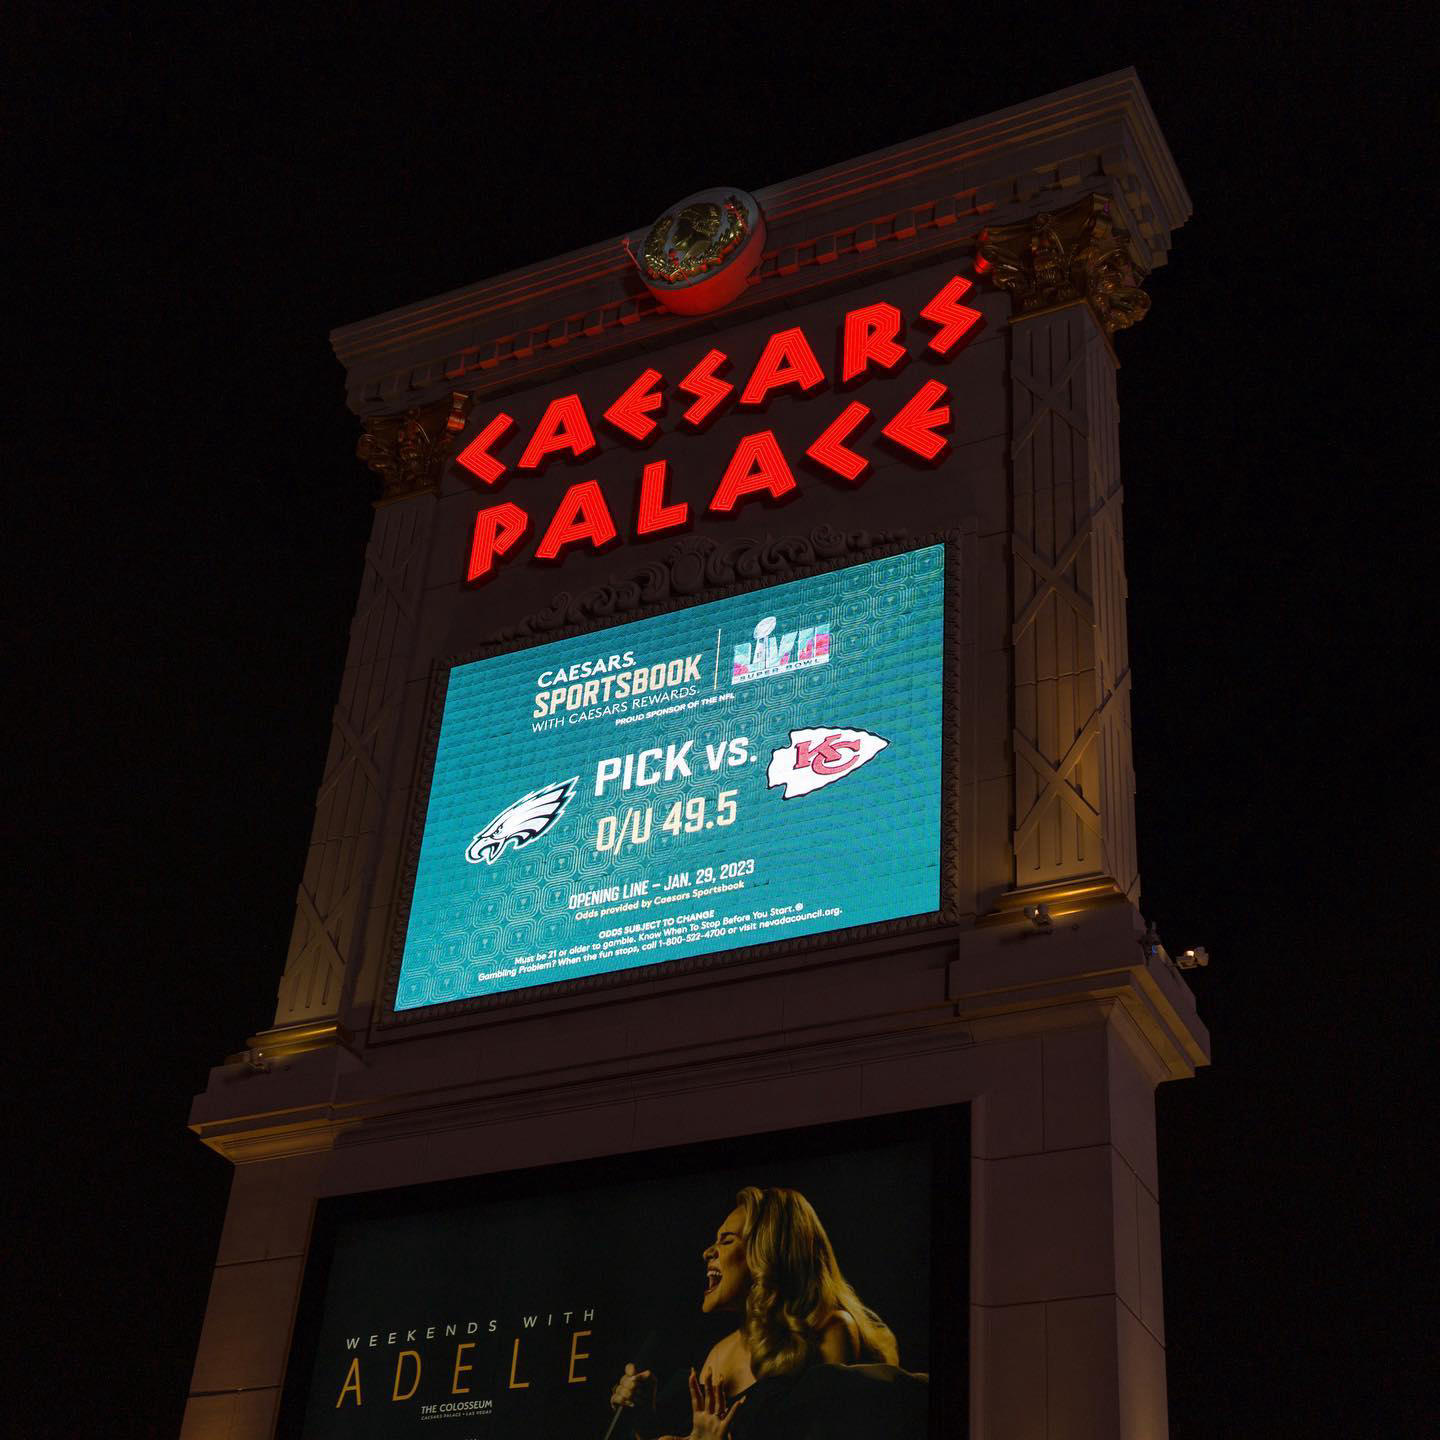 image  1 Our opening Super Bowl odds debuted on the #CaesarsPalace marquee last night